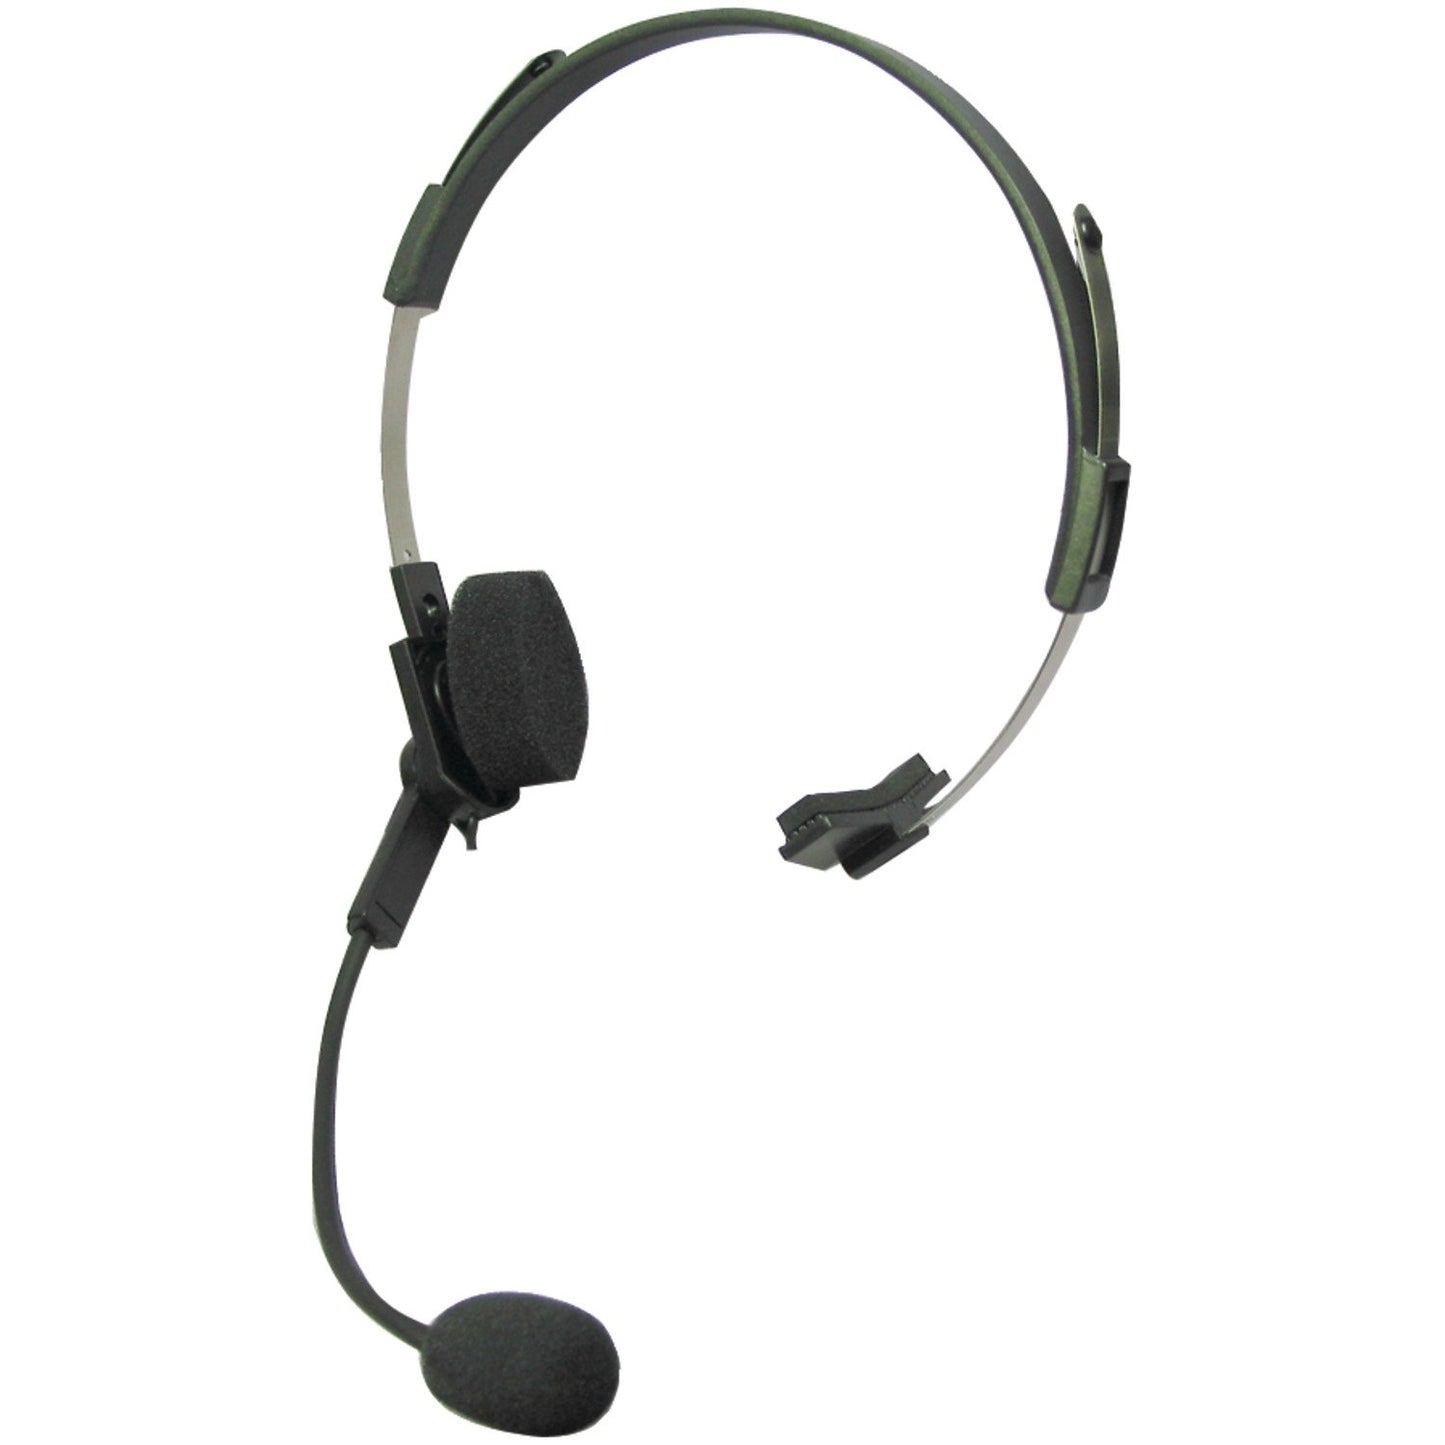 Motorola 53725 Single-Pin Talkabout Headset with Swivel Boom Microphone, Voice Activated Transmission (VOX) Capable, Compatible with TALKABOUT Radios